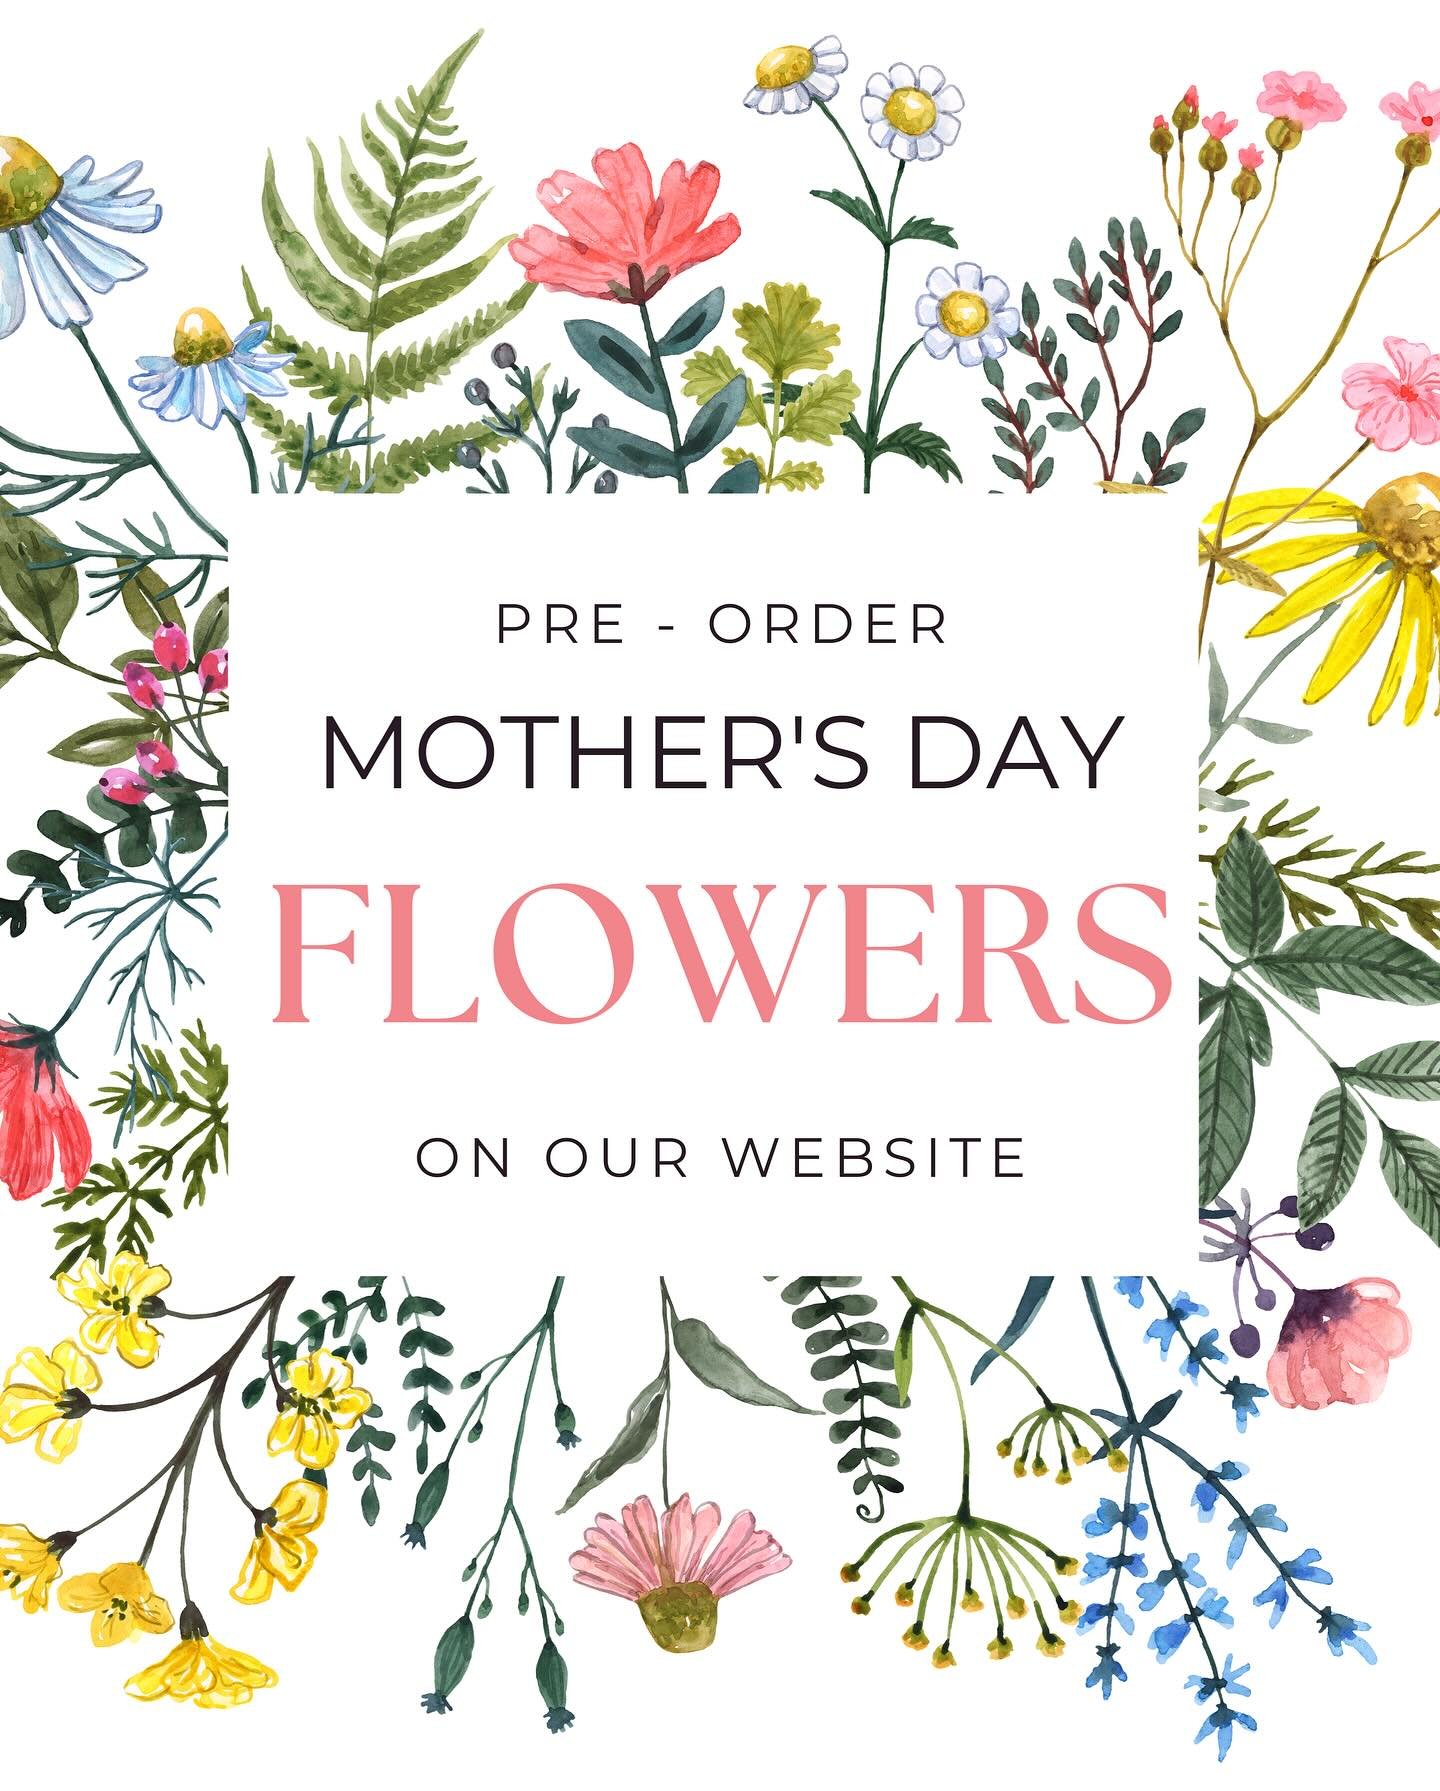 MOTHERS! We know what they like!
Preorders live on the website!

NEXT WEEKEND! 

Free in store pick up Saturday 5/11
It will be a fun day to stop by, shop downtown Dewey for the 2nd Saturday sales &amp; get your momma something special!

Preorders ar